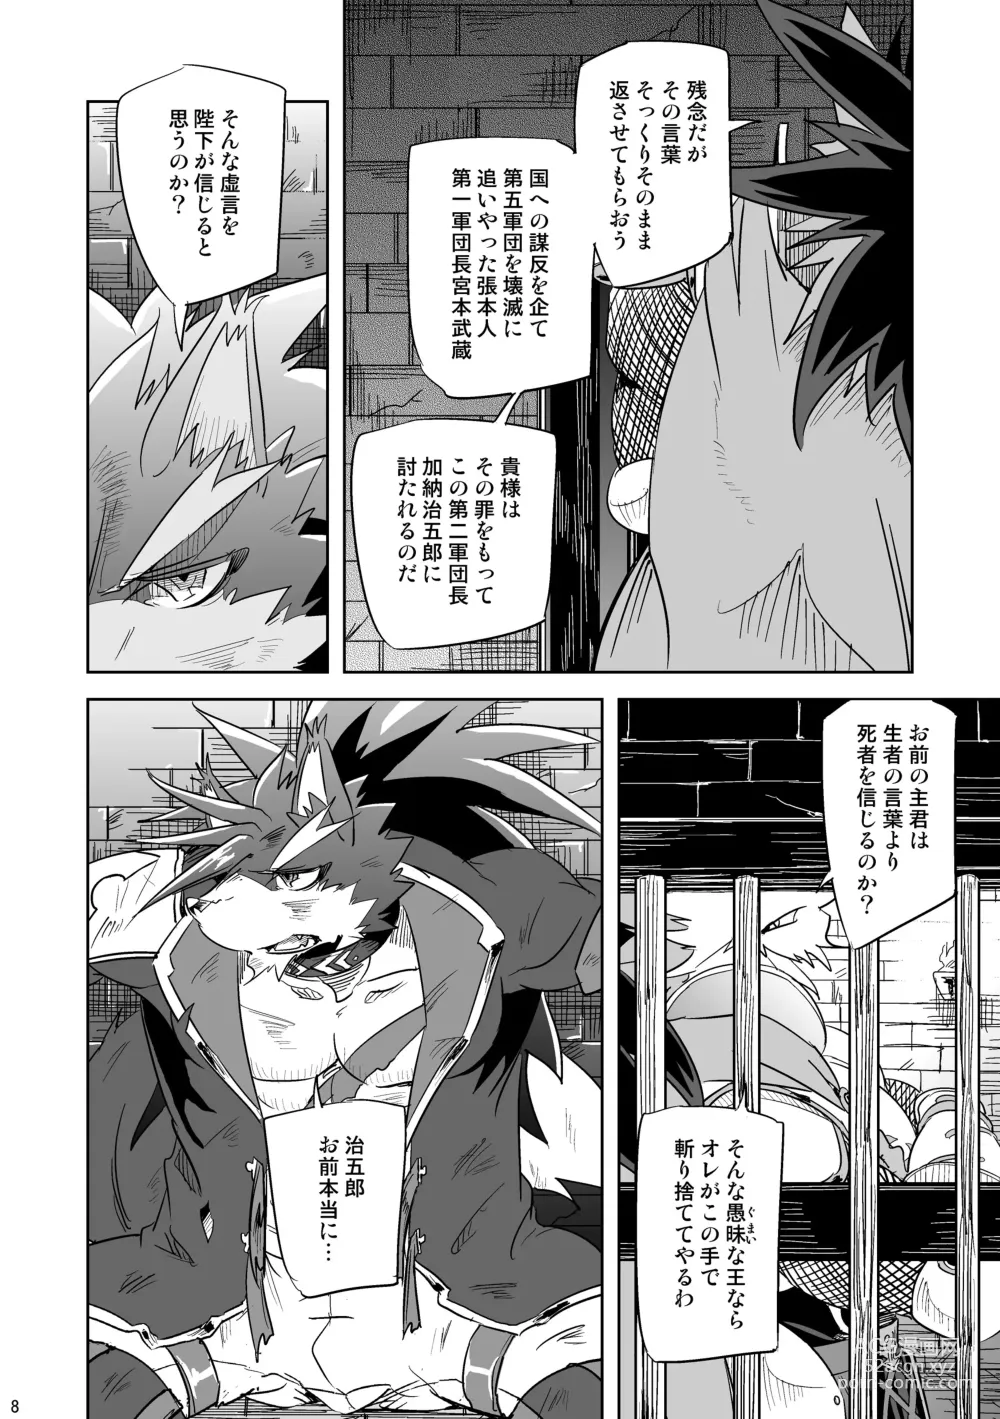 Page 8 of doujinshi Hero in Darkness